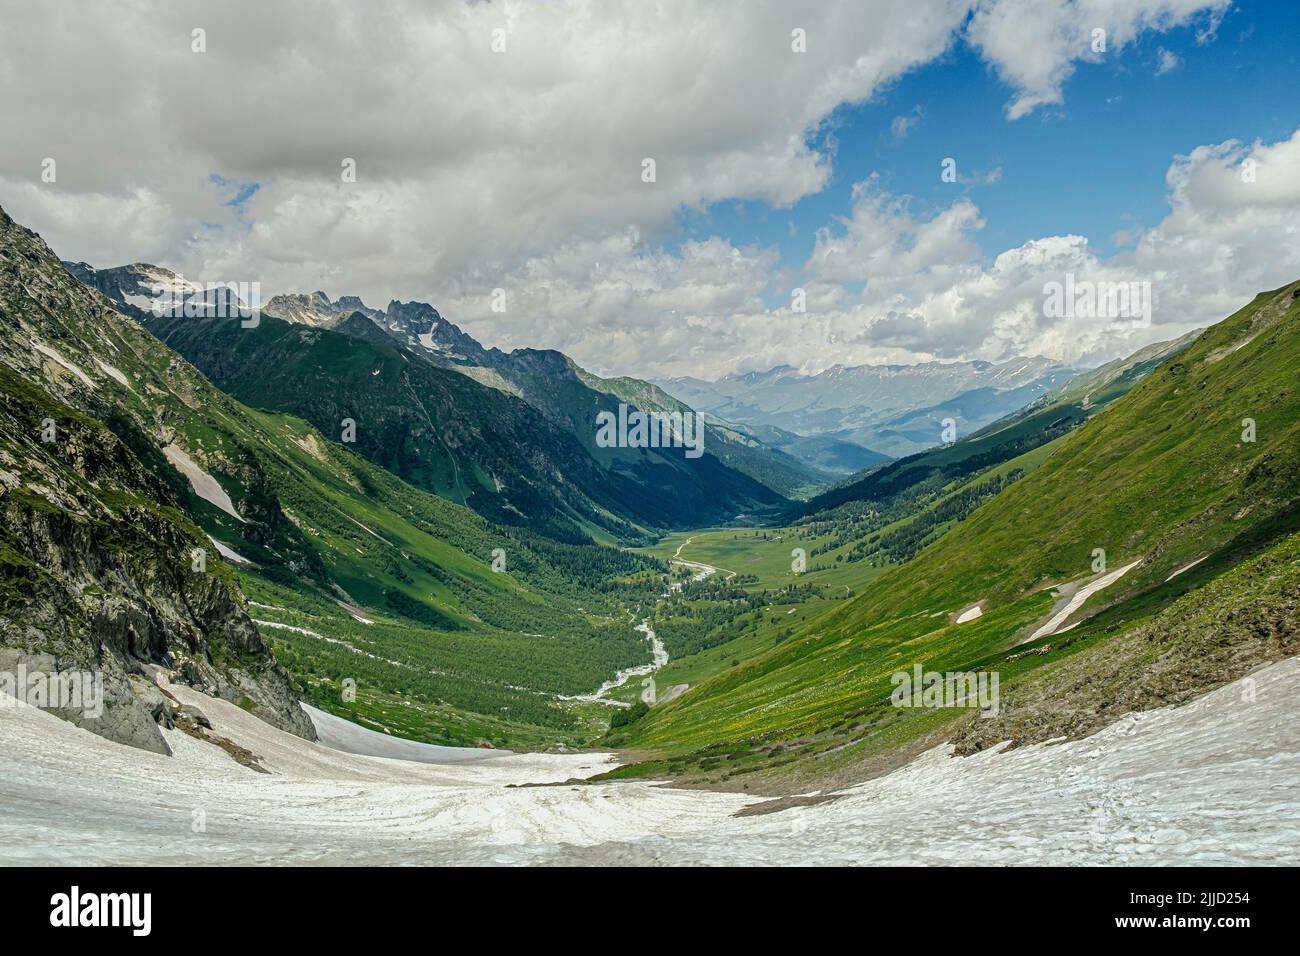 snowy mountain valley with blue sky and clouds Stock Photo